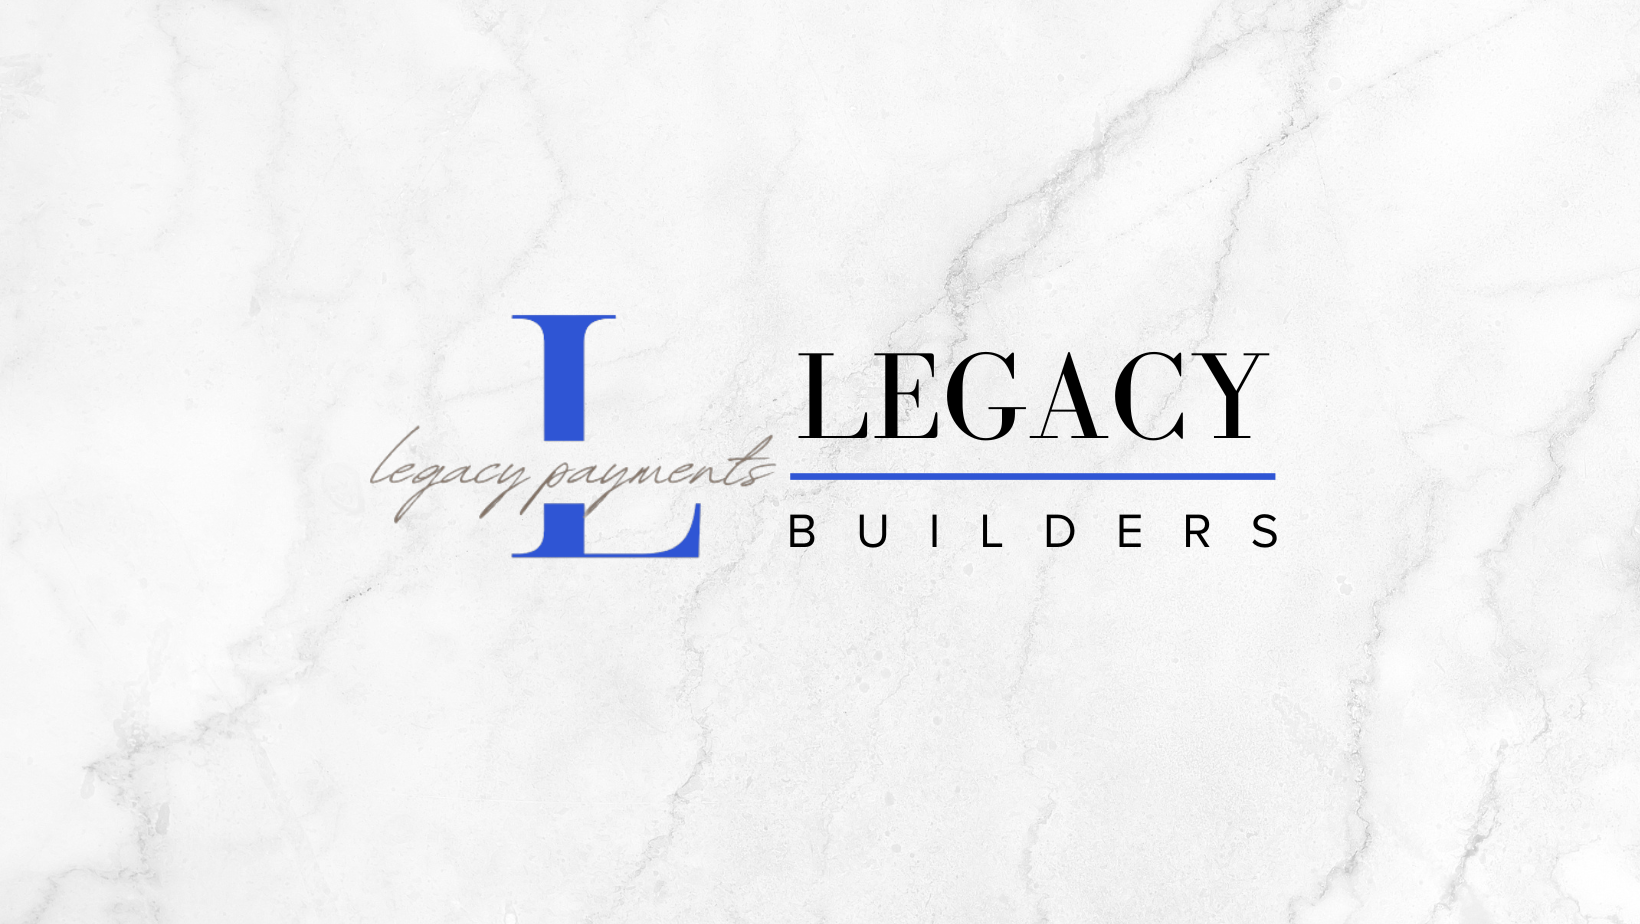 Legacy Payments